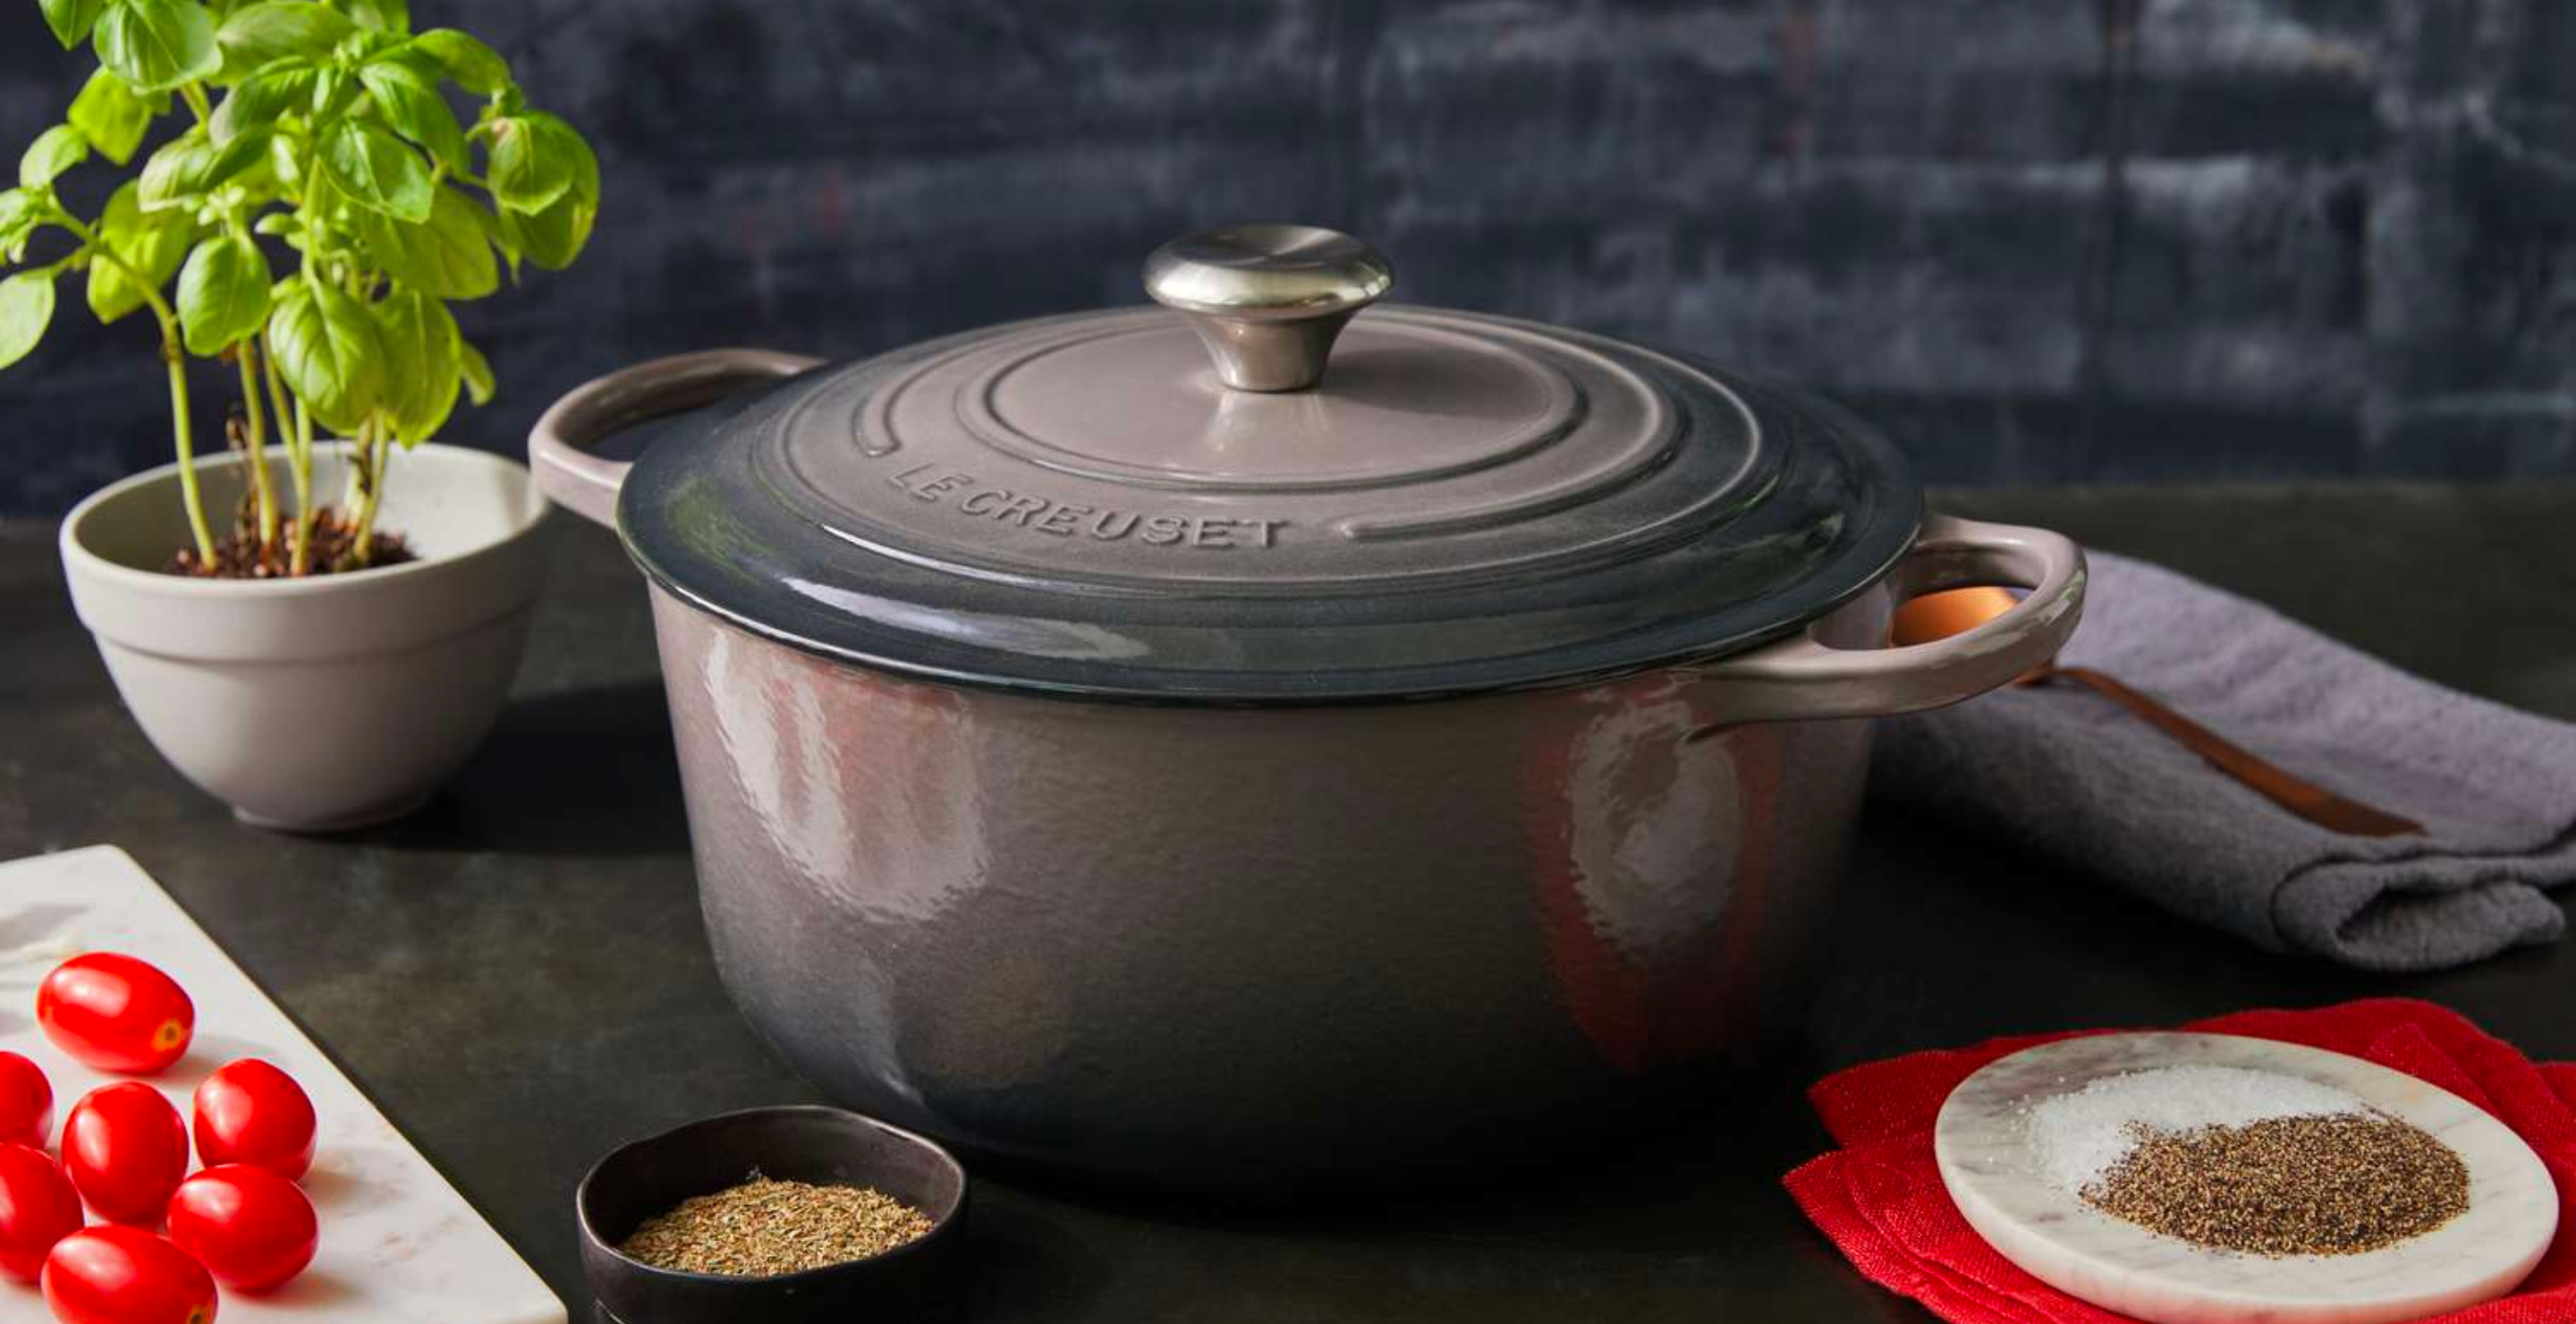 https://www.wideopencountry.com/wp-content/uploads/sites/4/2023/11/lecreuset-hed.png?fit=2880%2C1480